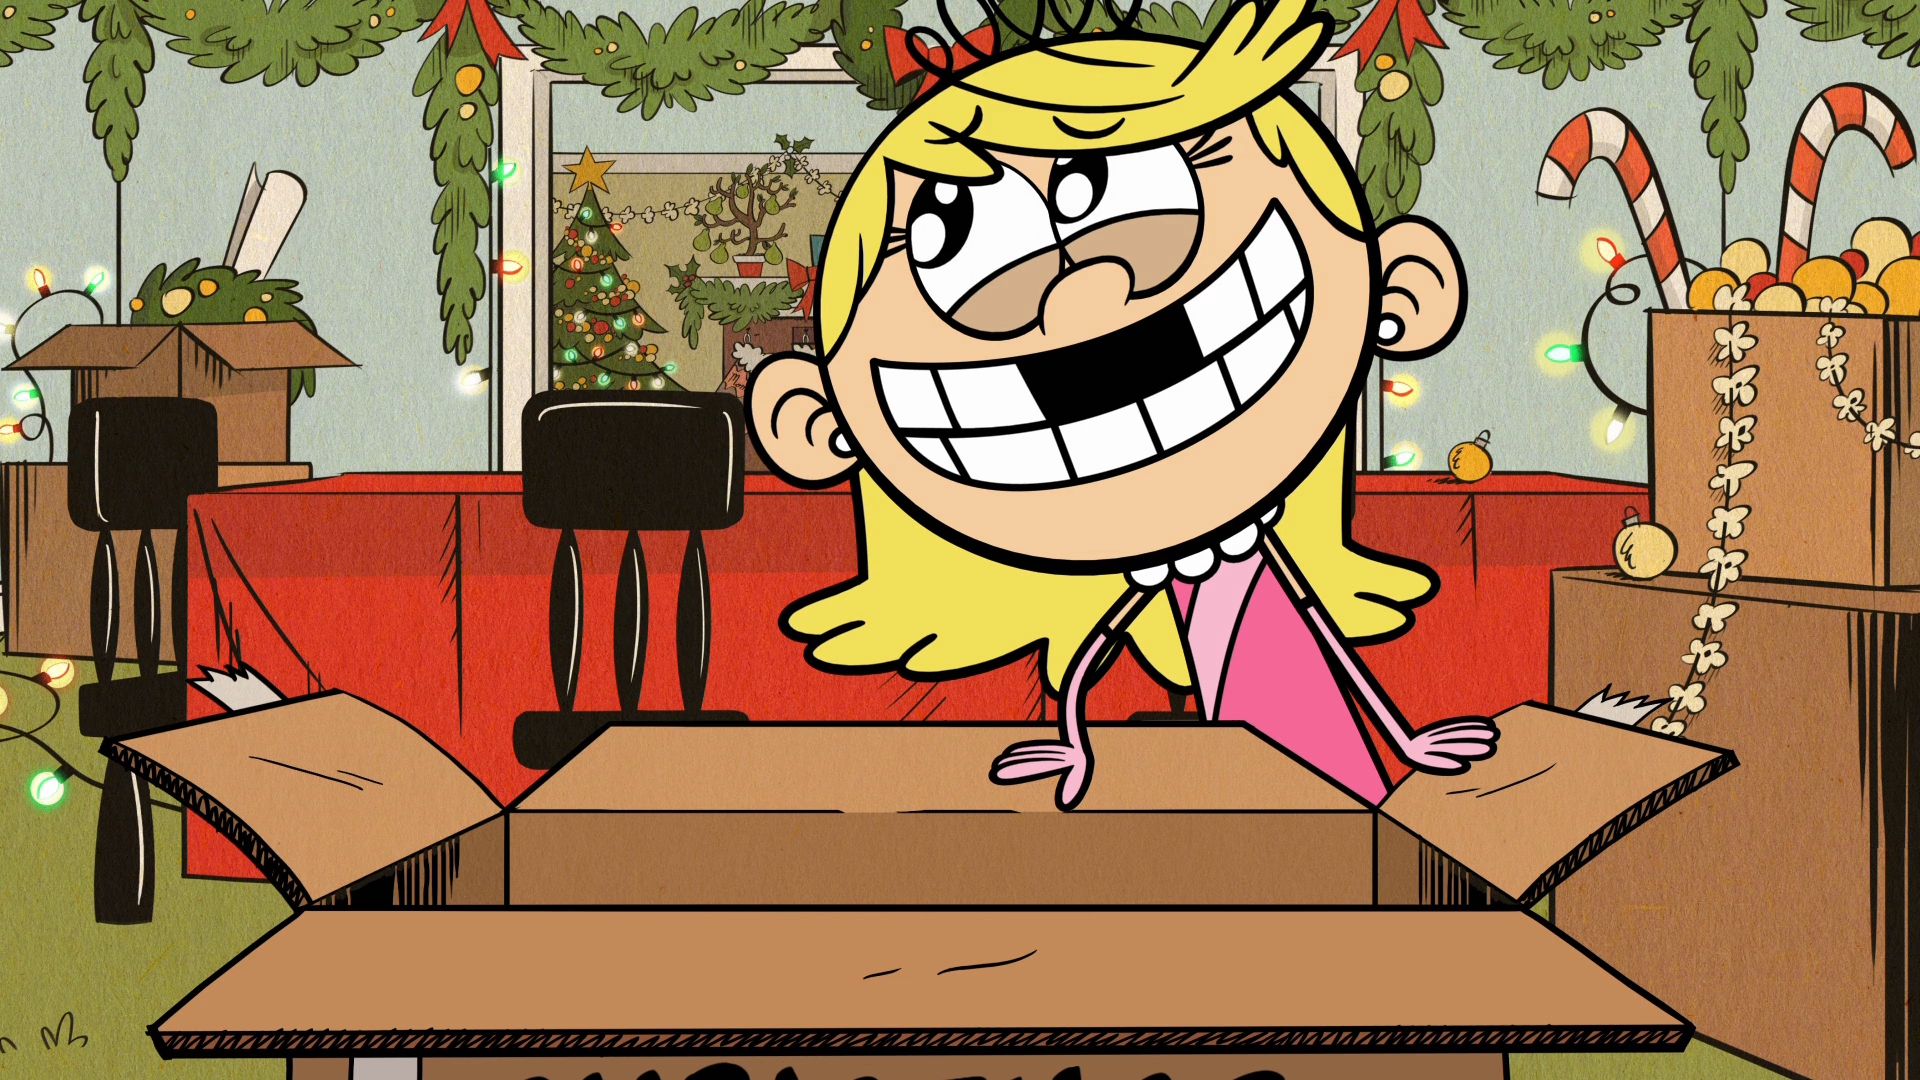 Lola Loud is one of the main characters from the Nickelodeon animated serie...